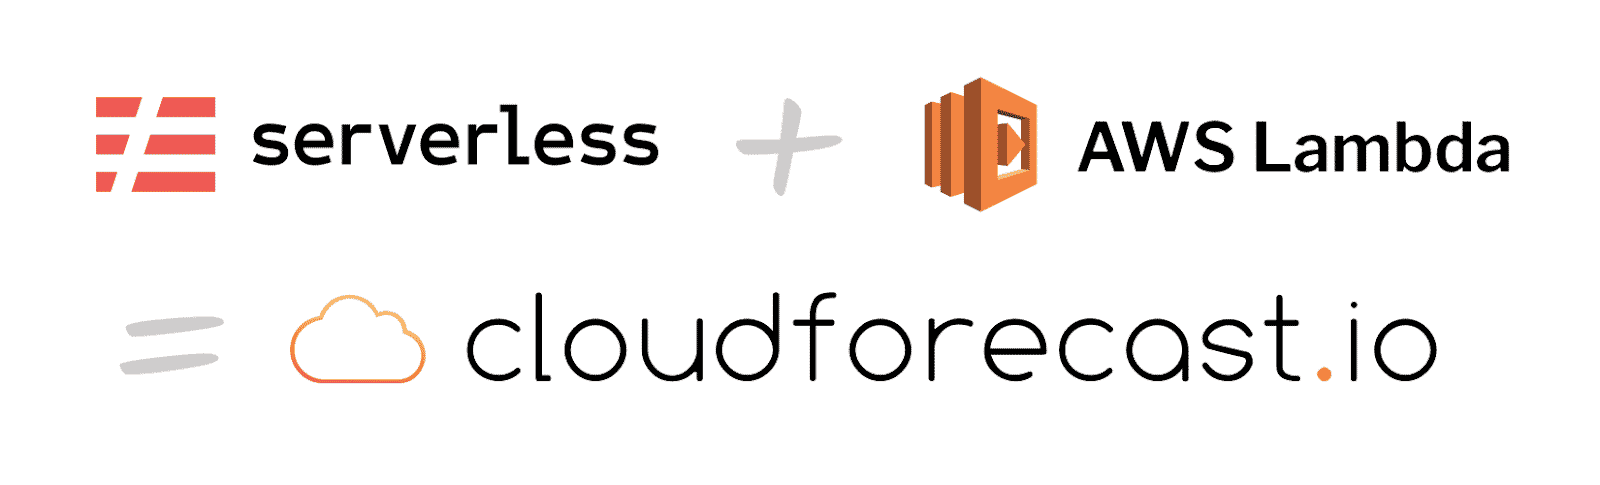 How We Saved Over $1,000 By Building CloudForecast With Serverless And AWS Lambda150